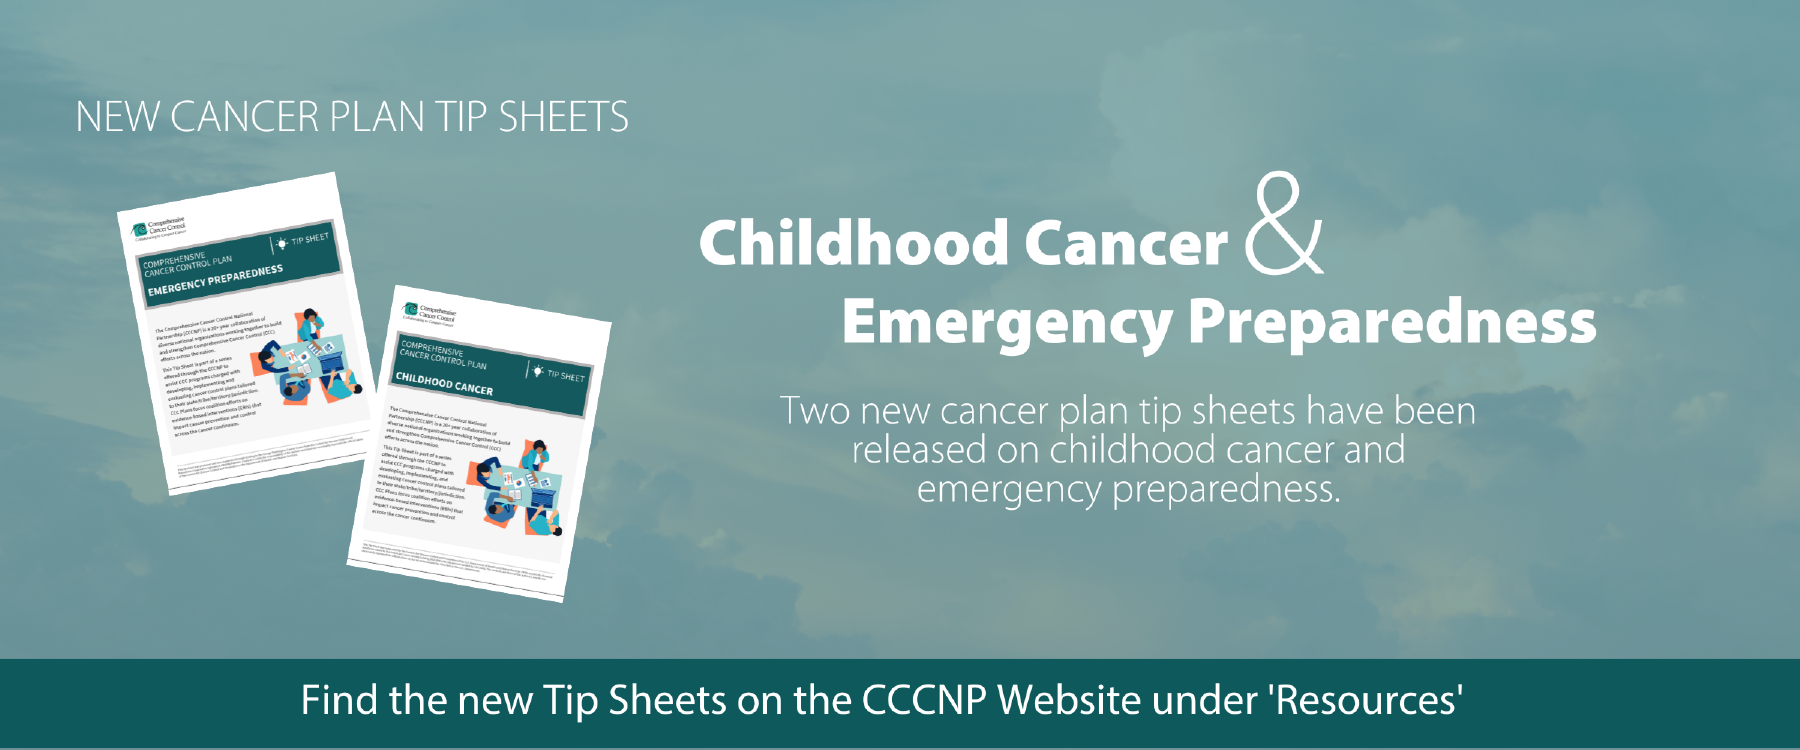 Notification that Childhood Cancer & Emergency Preparedness Tip Sheets have been added to the Resources page